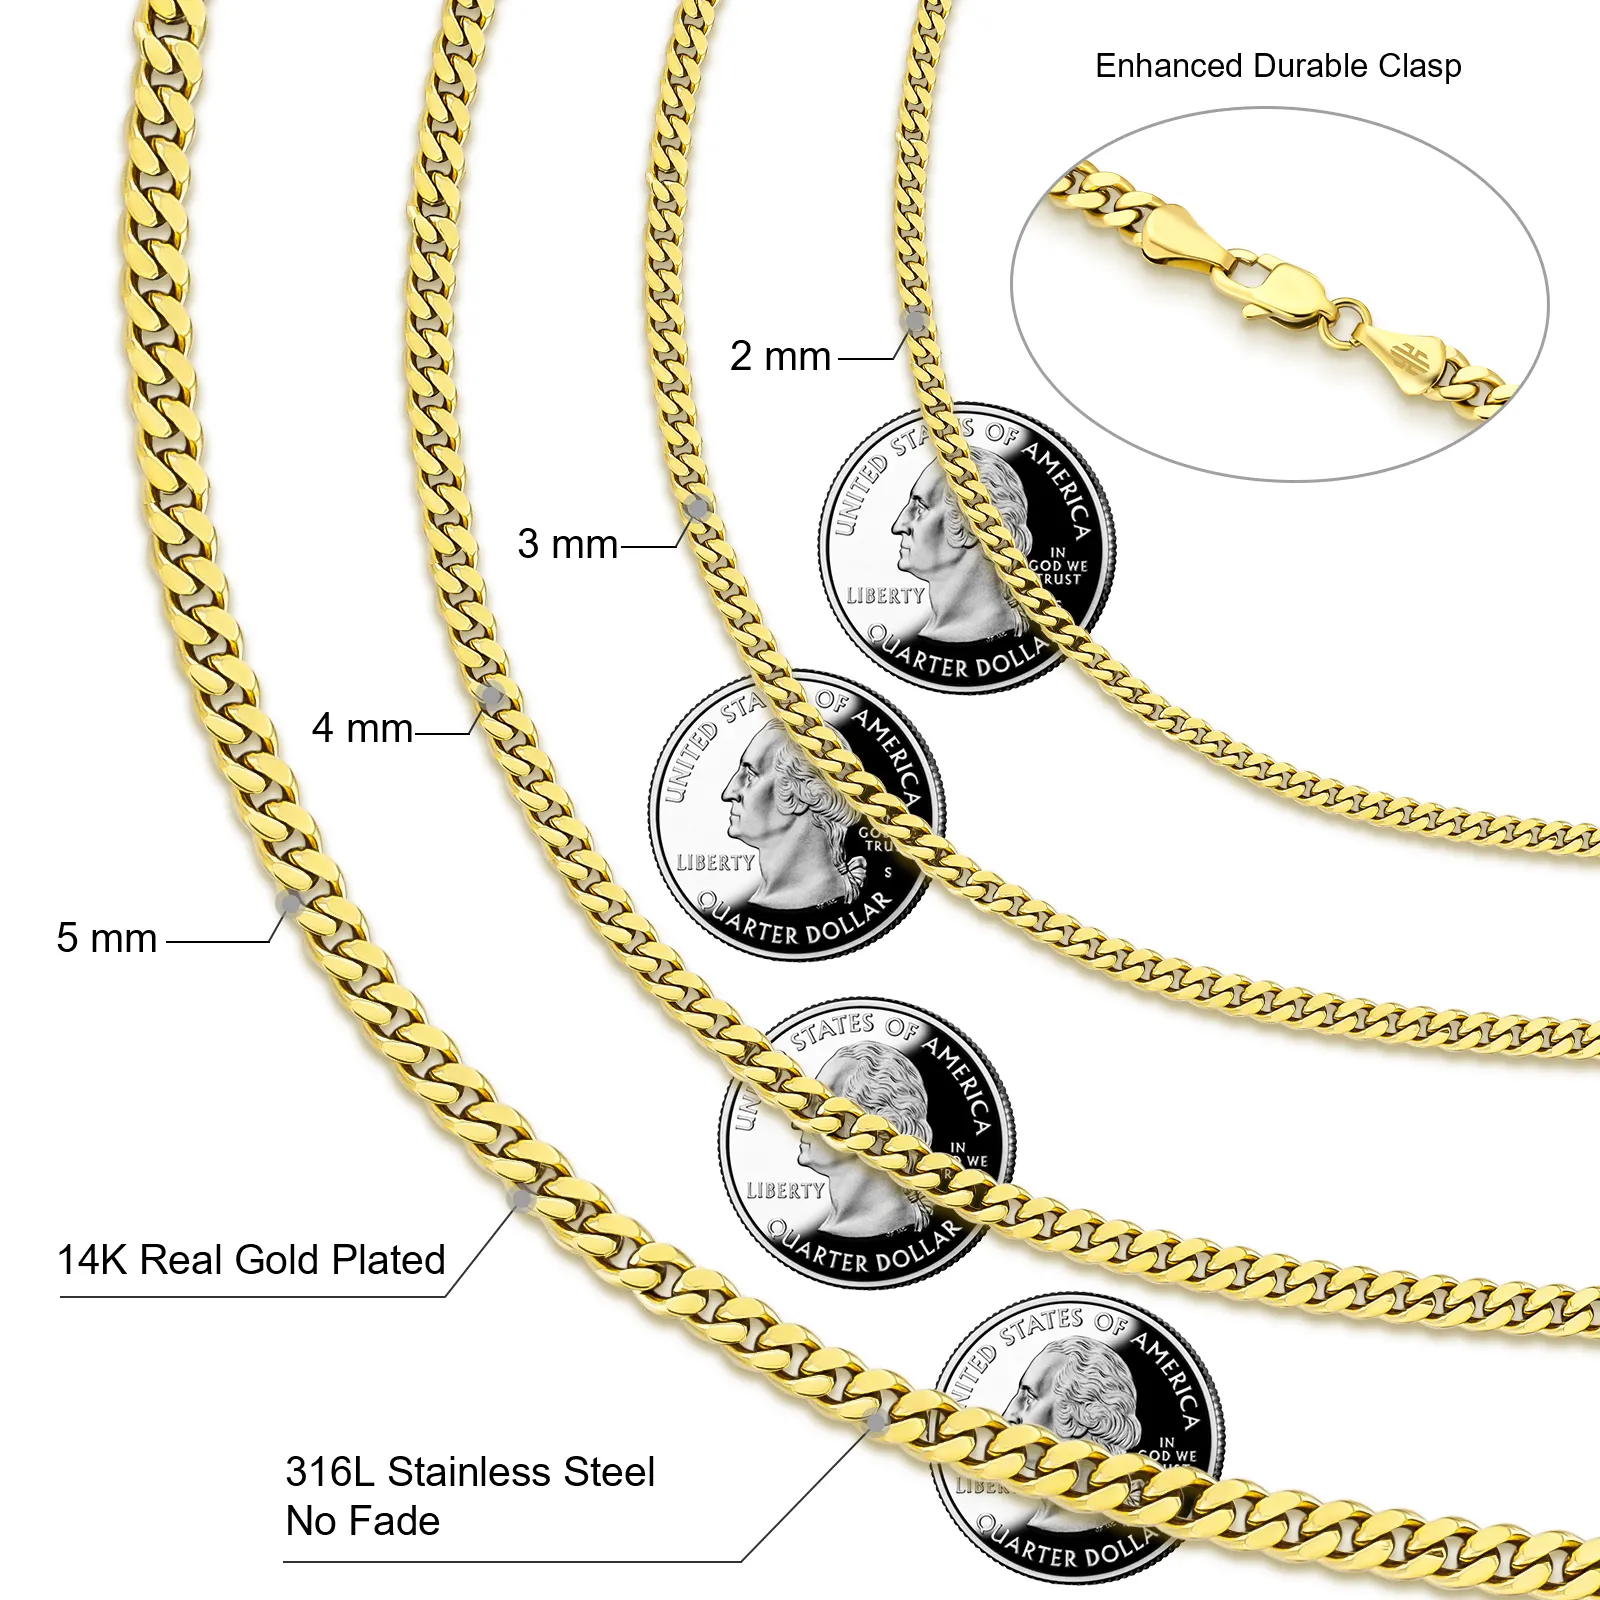 Wholesale Non Tarnish 14K Real Yellow Gold Plated Curb Link 2MM 3MM Miami Stainless Steel Jewelry Women Men Cuban Chain Necklace